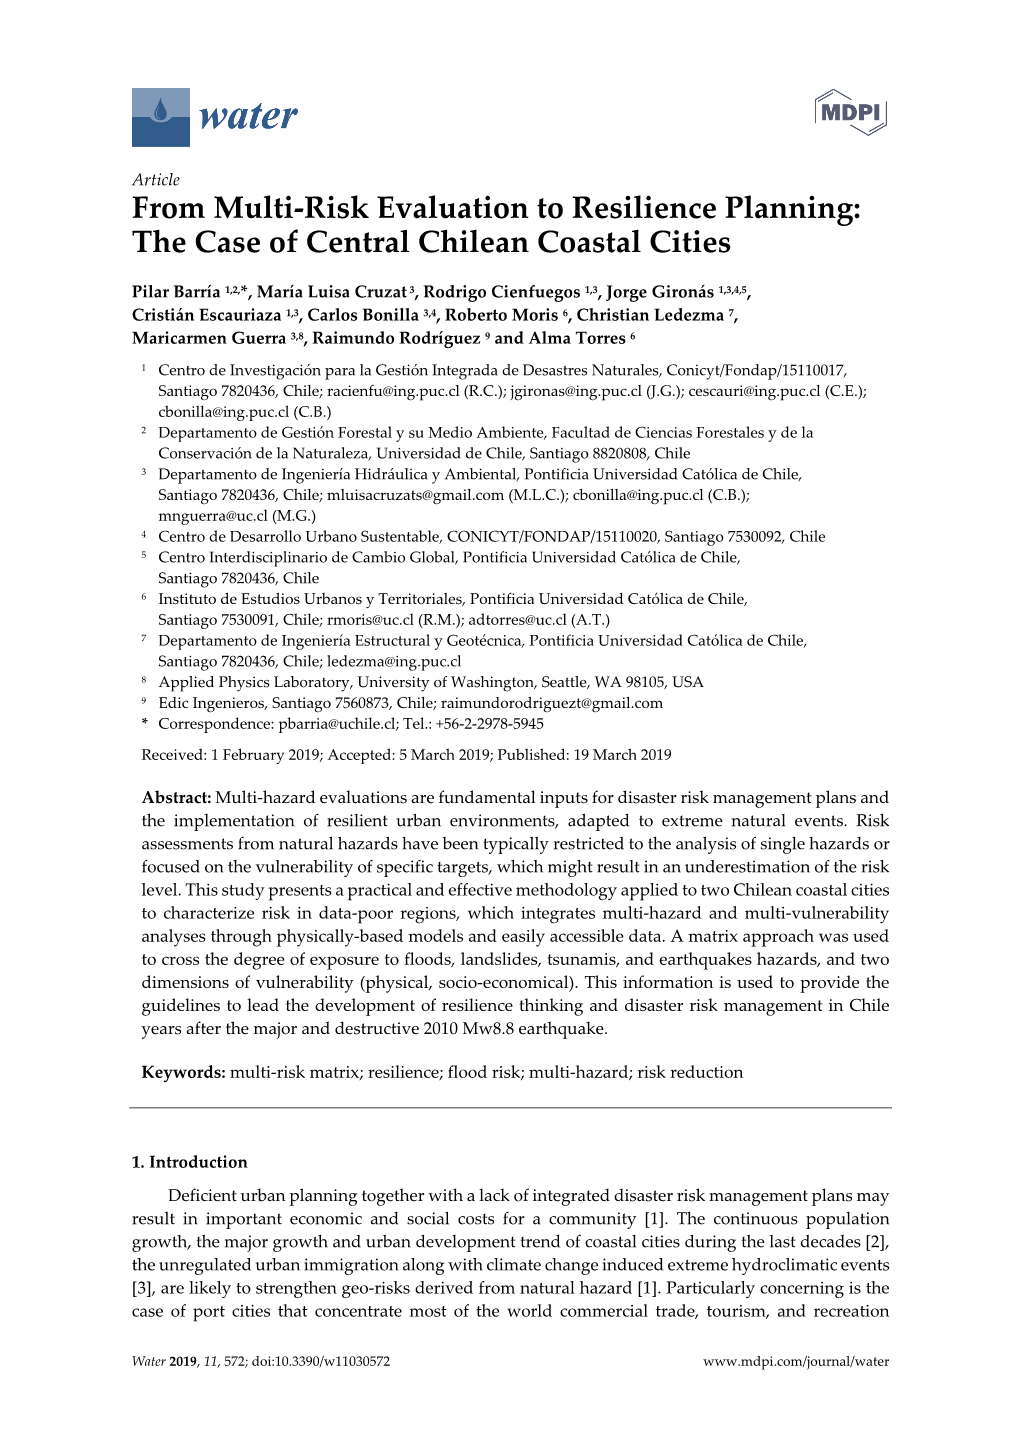 The Case of Central Chilean Coastal Cities